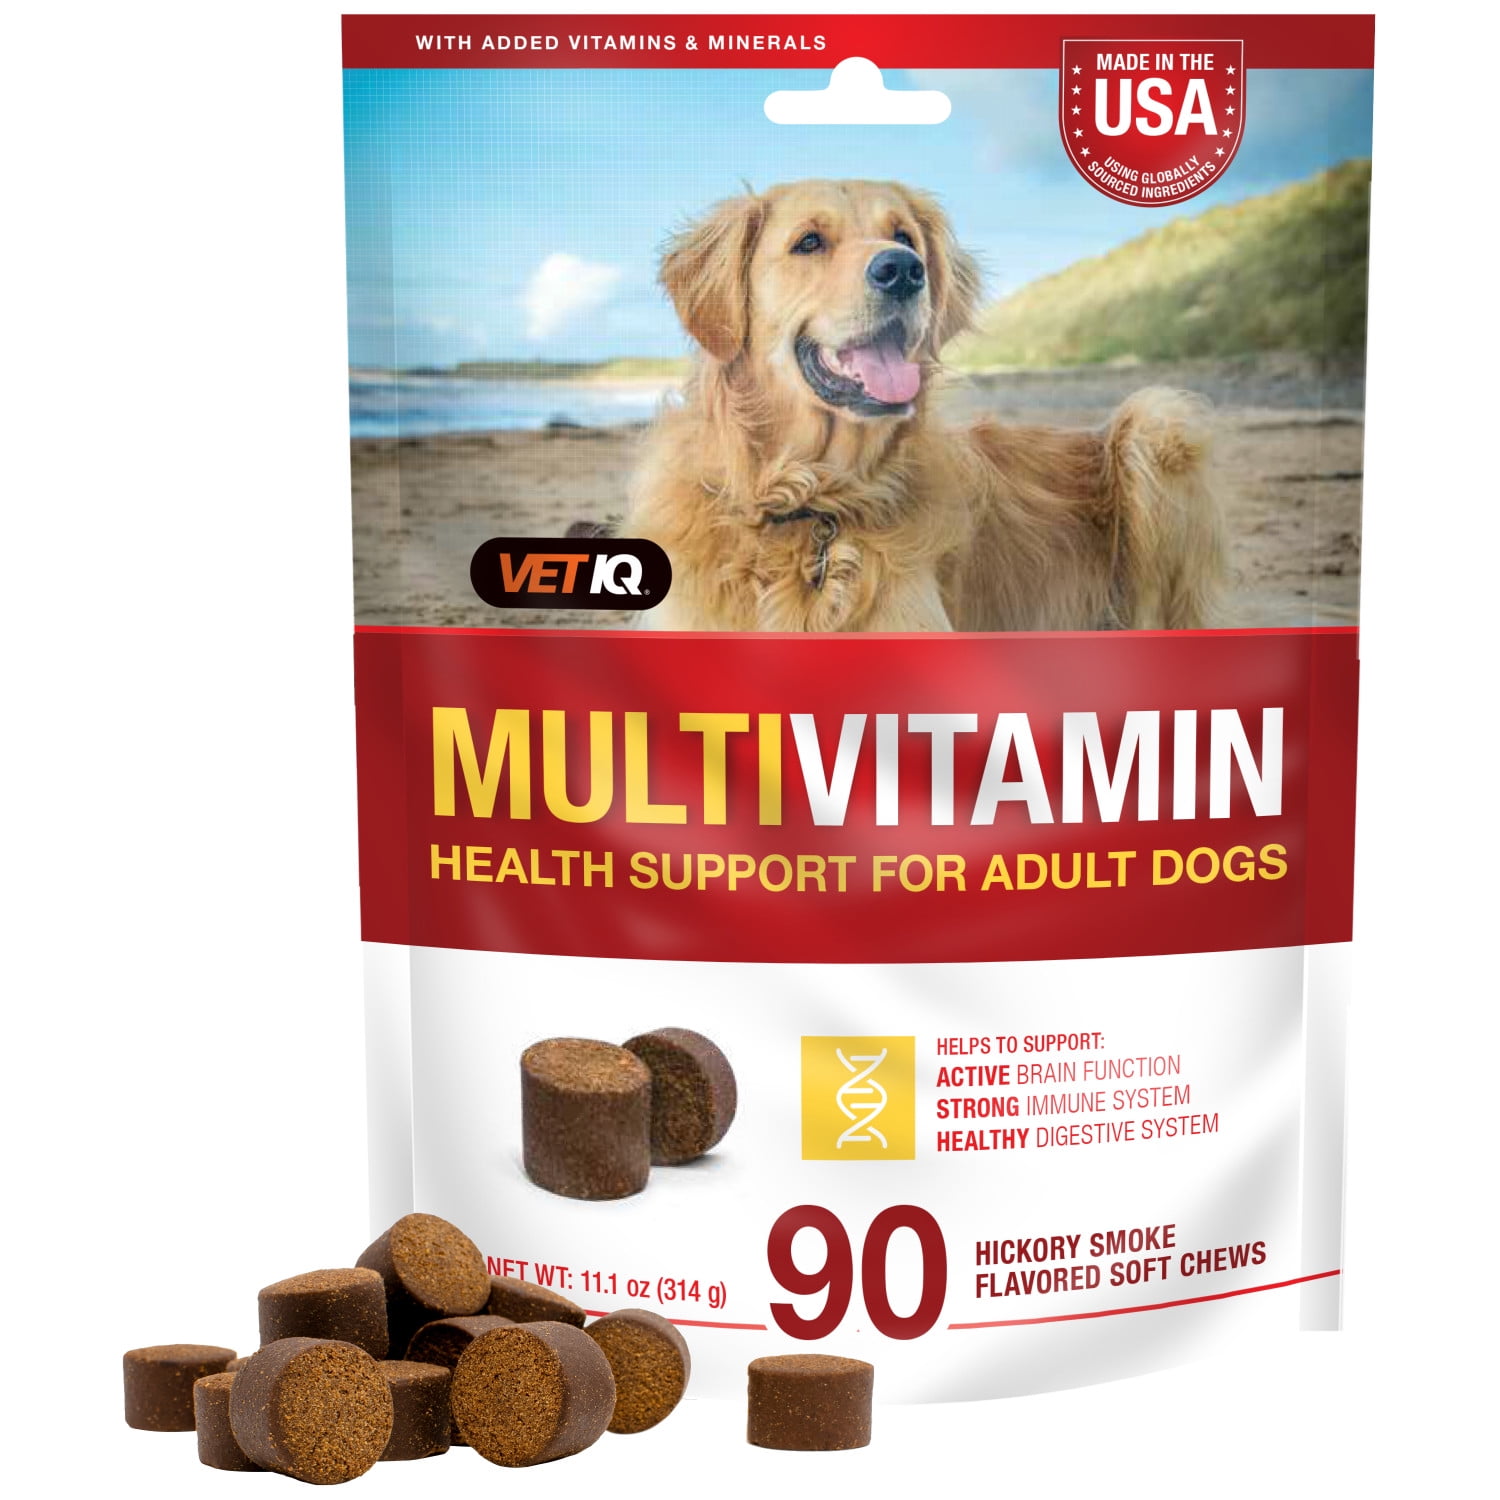 VETIQ Multi-Vitamin Supplement for Adult Dogs, Hickory Smoked Flavored Soft Chews, 90 Count, 11.1 oz